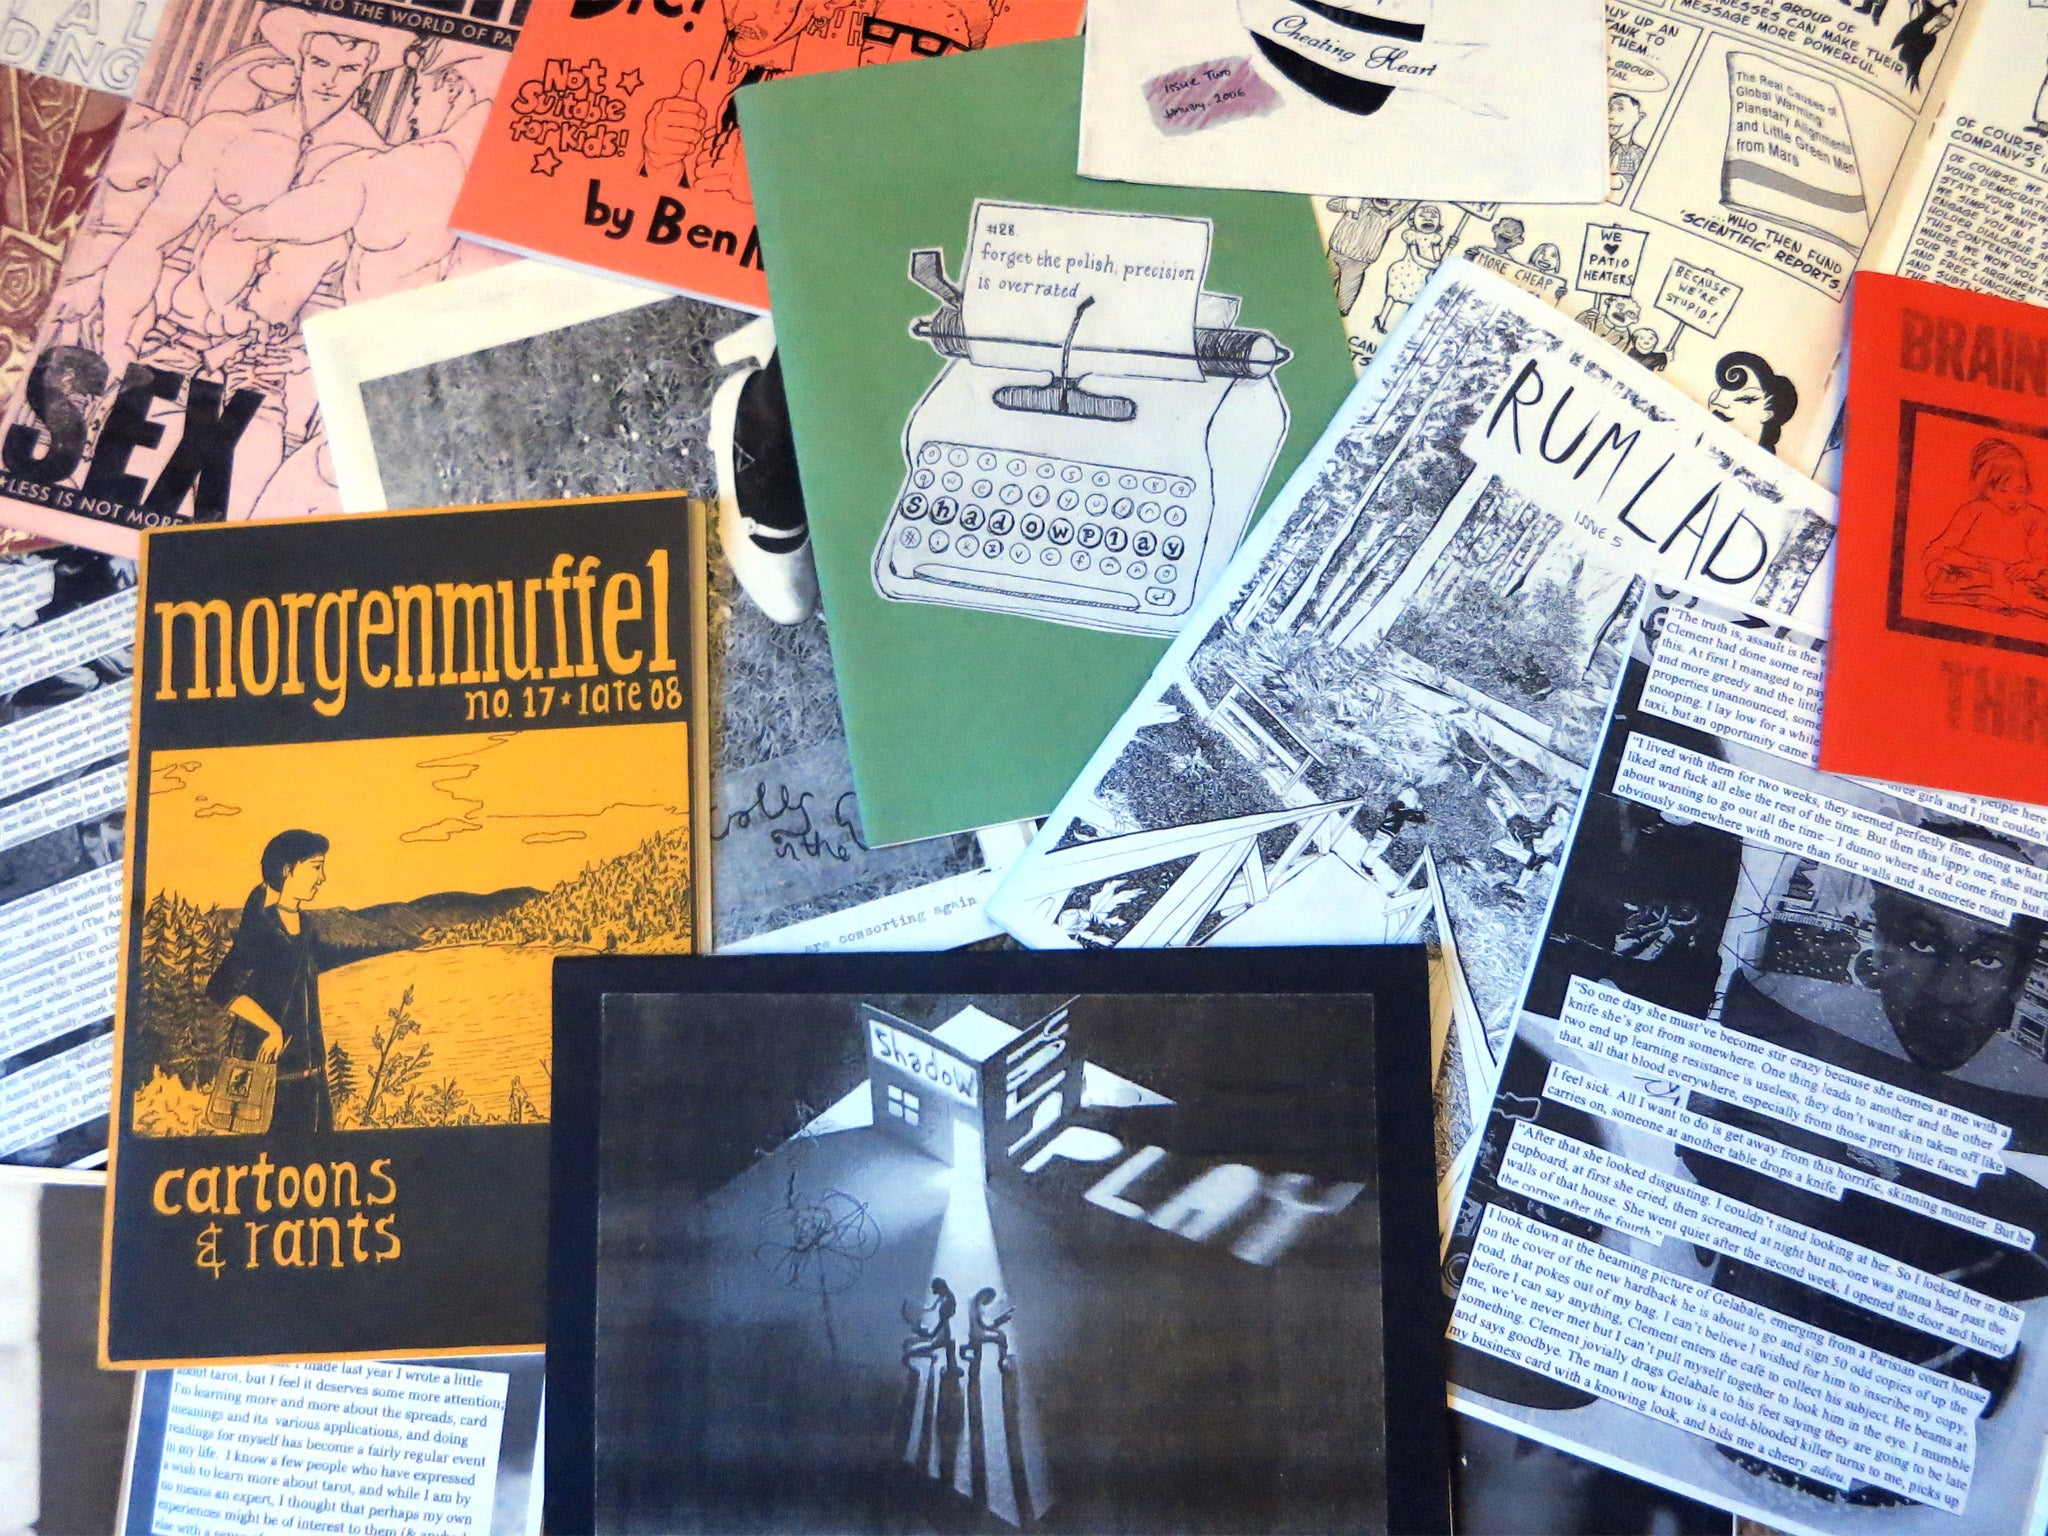 Cut and paste: a selection of the writer’s fanzine collection